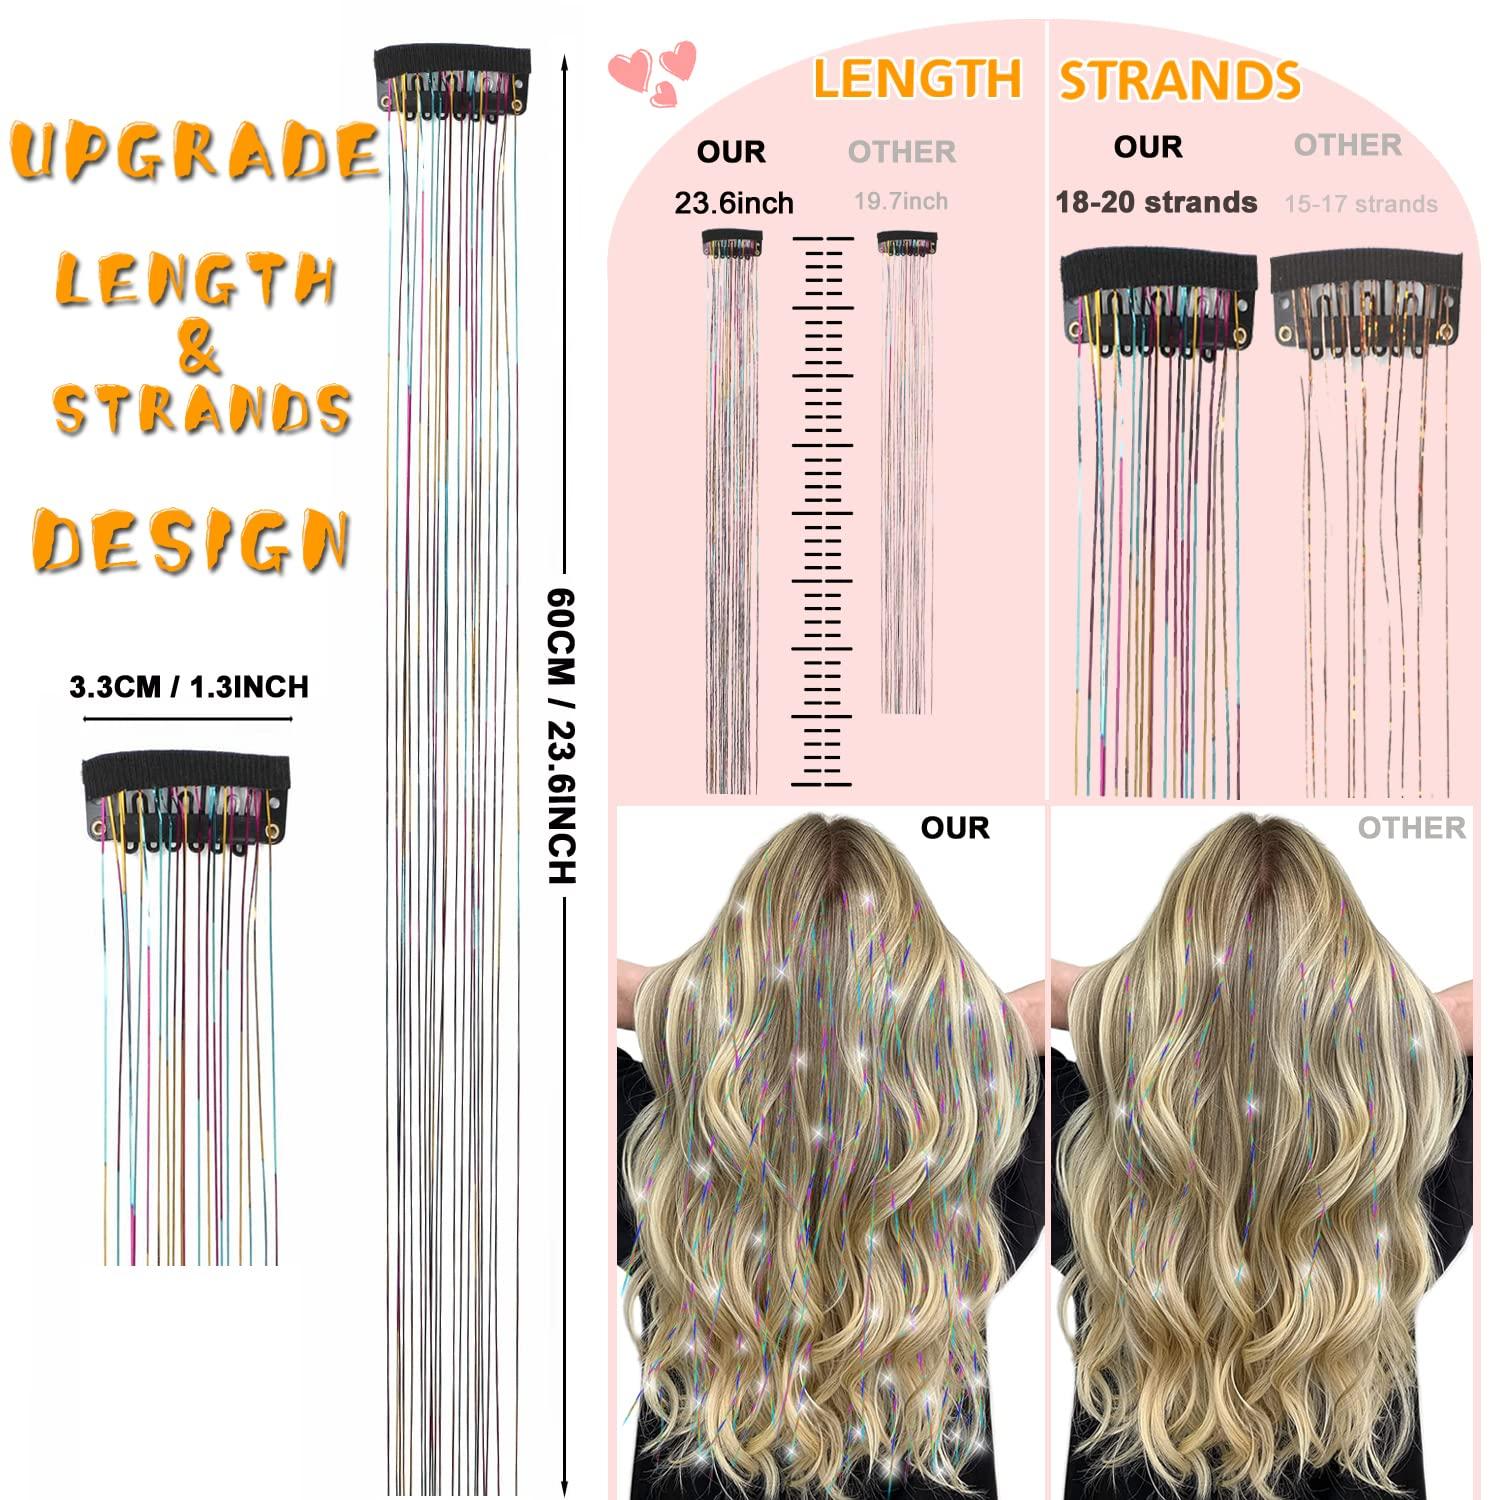 Hair Tinsel Strands Sparkly Hair Extensions Highlights Glitter Hair Tinsel  - China Hair Tinsel and Hair Accessories price